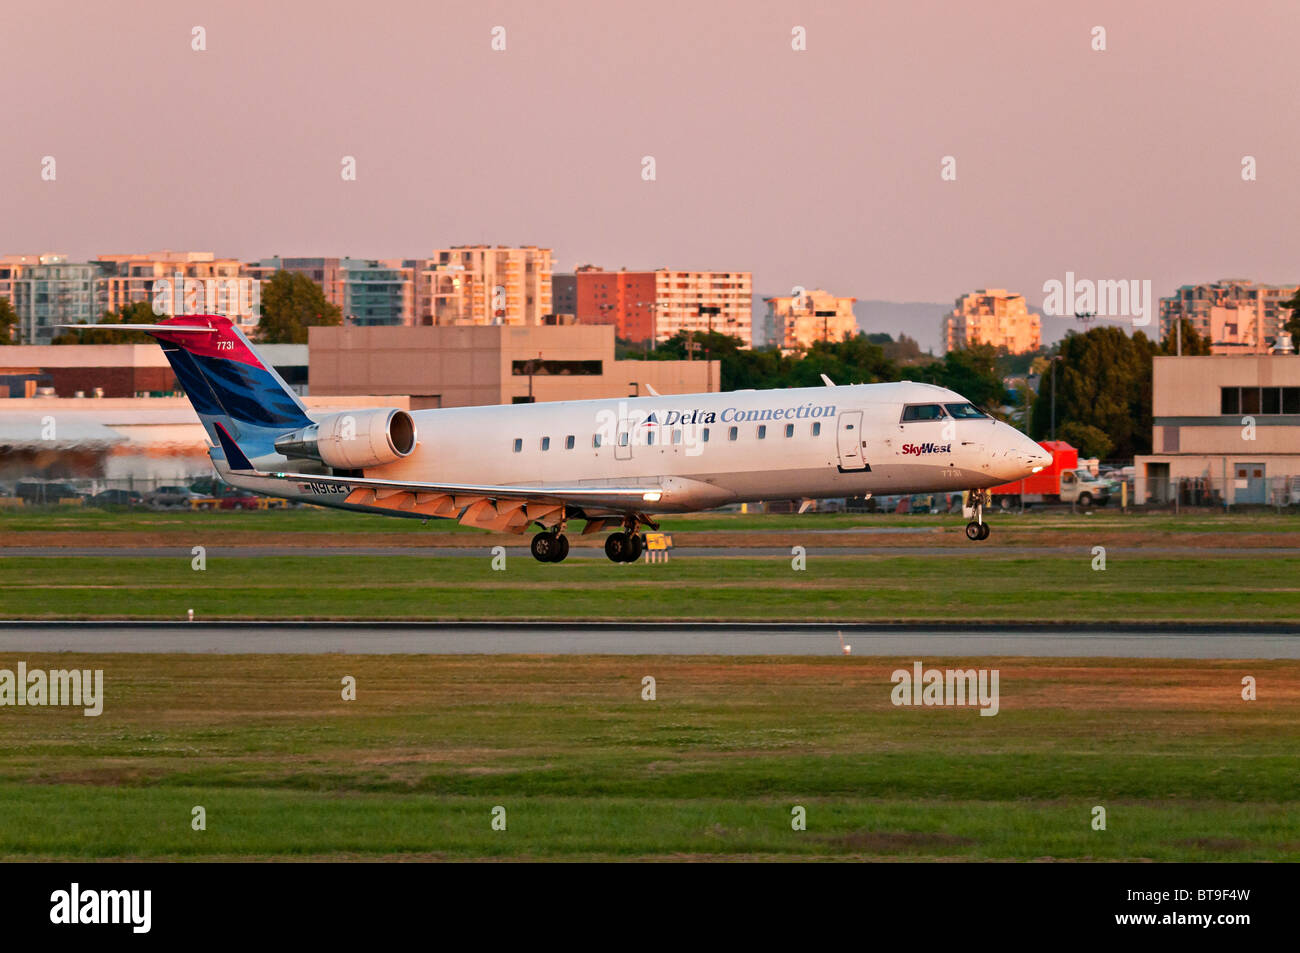 A Delta Connection (SkyWest Airlines) CRJ-200ER regional jet airliner lands at Vancouver International Airport (YVR) at sunset. Stock Photo